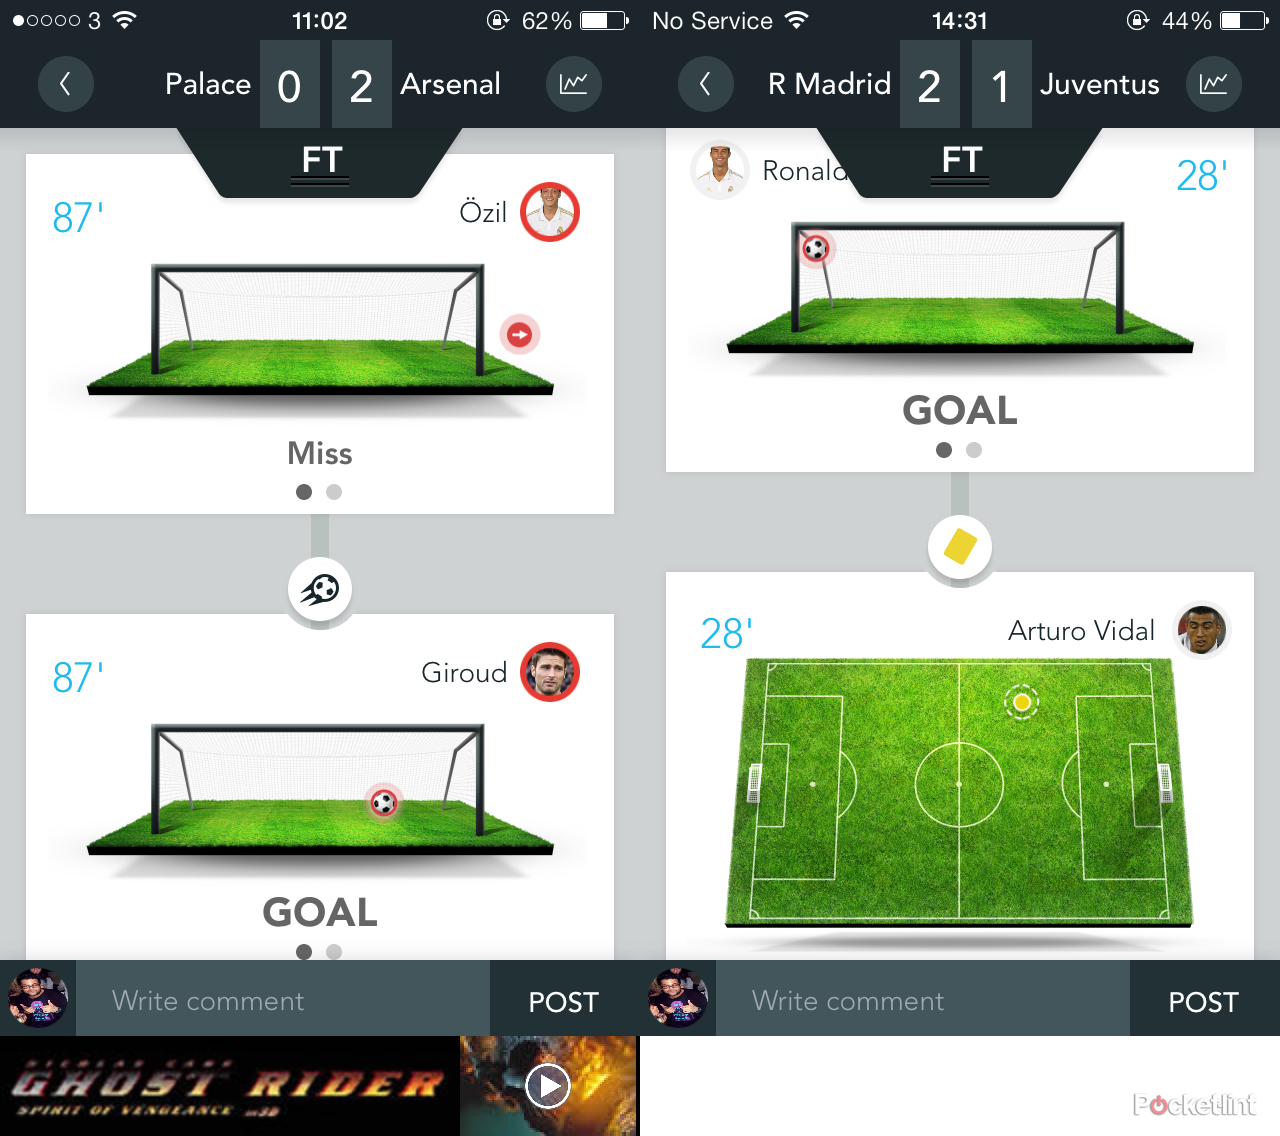 squawka app coming soon real time stats for footy fans image 2